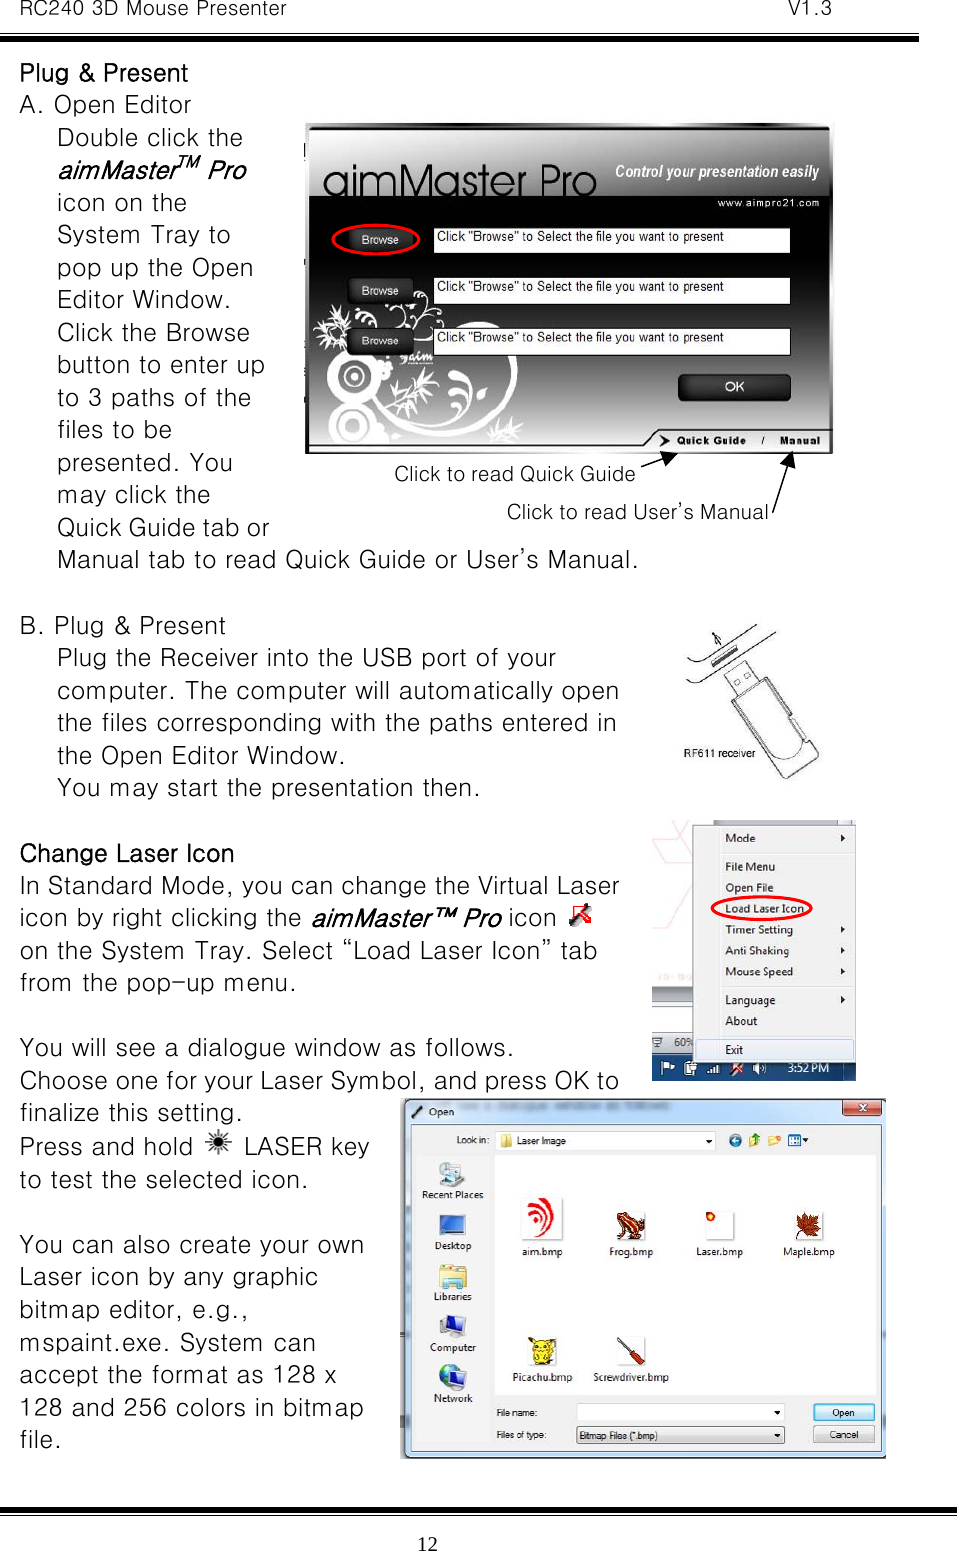 RC240 3D Mouse Presenter   V1.3  12Plug &amp; Present A. Open Editor Double click the aimMasterTM Pro icon on the System Tray to pop up the Open Editor Window.   Click the Browse button to enter up to 3 paths of the files to be presented. You may click the Quick Guide tab or Manual tab to read Quick Guide or User’s Manual.  B. Plug &amp; Present Plug the Receiver into the USB port of your computer. The computer will automatically open the files corresponding with the paths entered in the Open Editor Window.   You may start the presentation then.  Change Laser Icon In Standard Mode, you can change the Virtual Laser icon by right clicking the aimMaster™ Pro icon   on the System Tray. Select “Load Laser Icon” tab from the pop-up menu.    You will see a dialogue window as follows. Choose one for your Laser Symbol, and press OK to finalize this setting.   Press and hold   LASER key to test the selected icon.  You can also create your own Laser icon by any graphic bitmap editor, e.g., mspaint.exe. System can accept the format as 128 x 128 and 256 colors in bitmap file.    Click to read Quick GuideClick to read User’s Manual